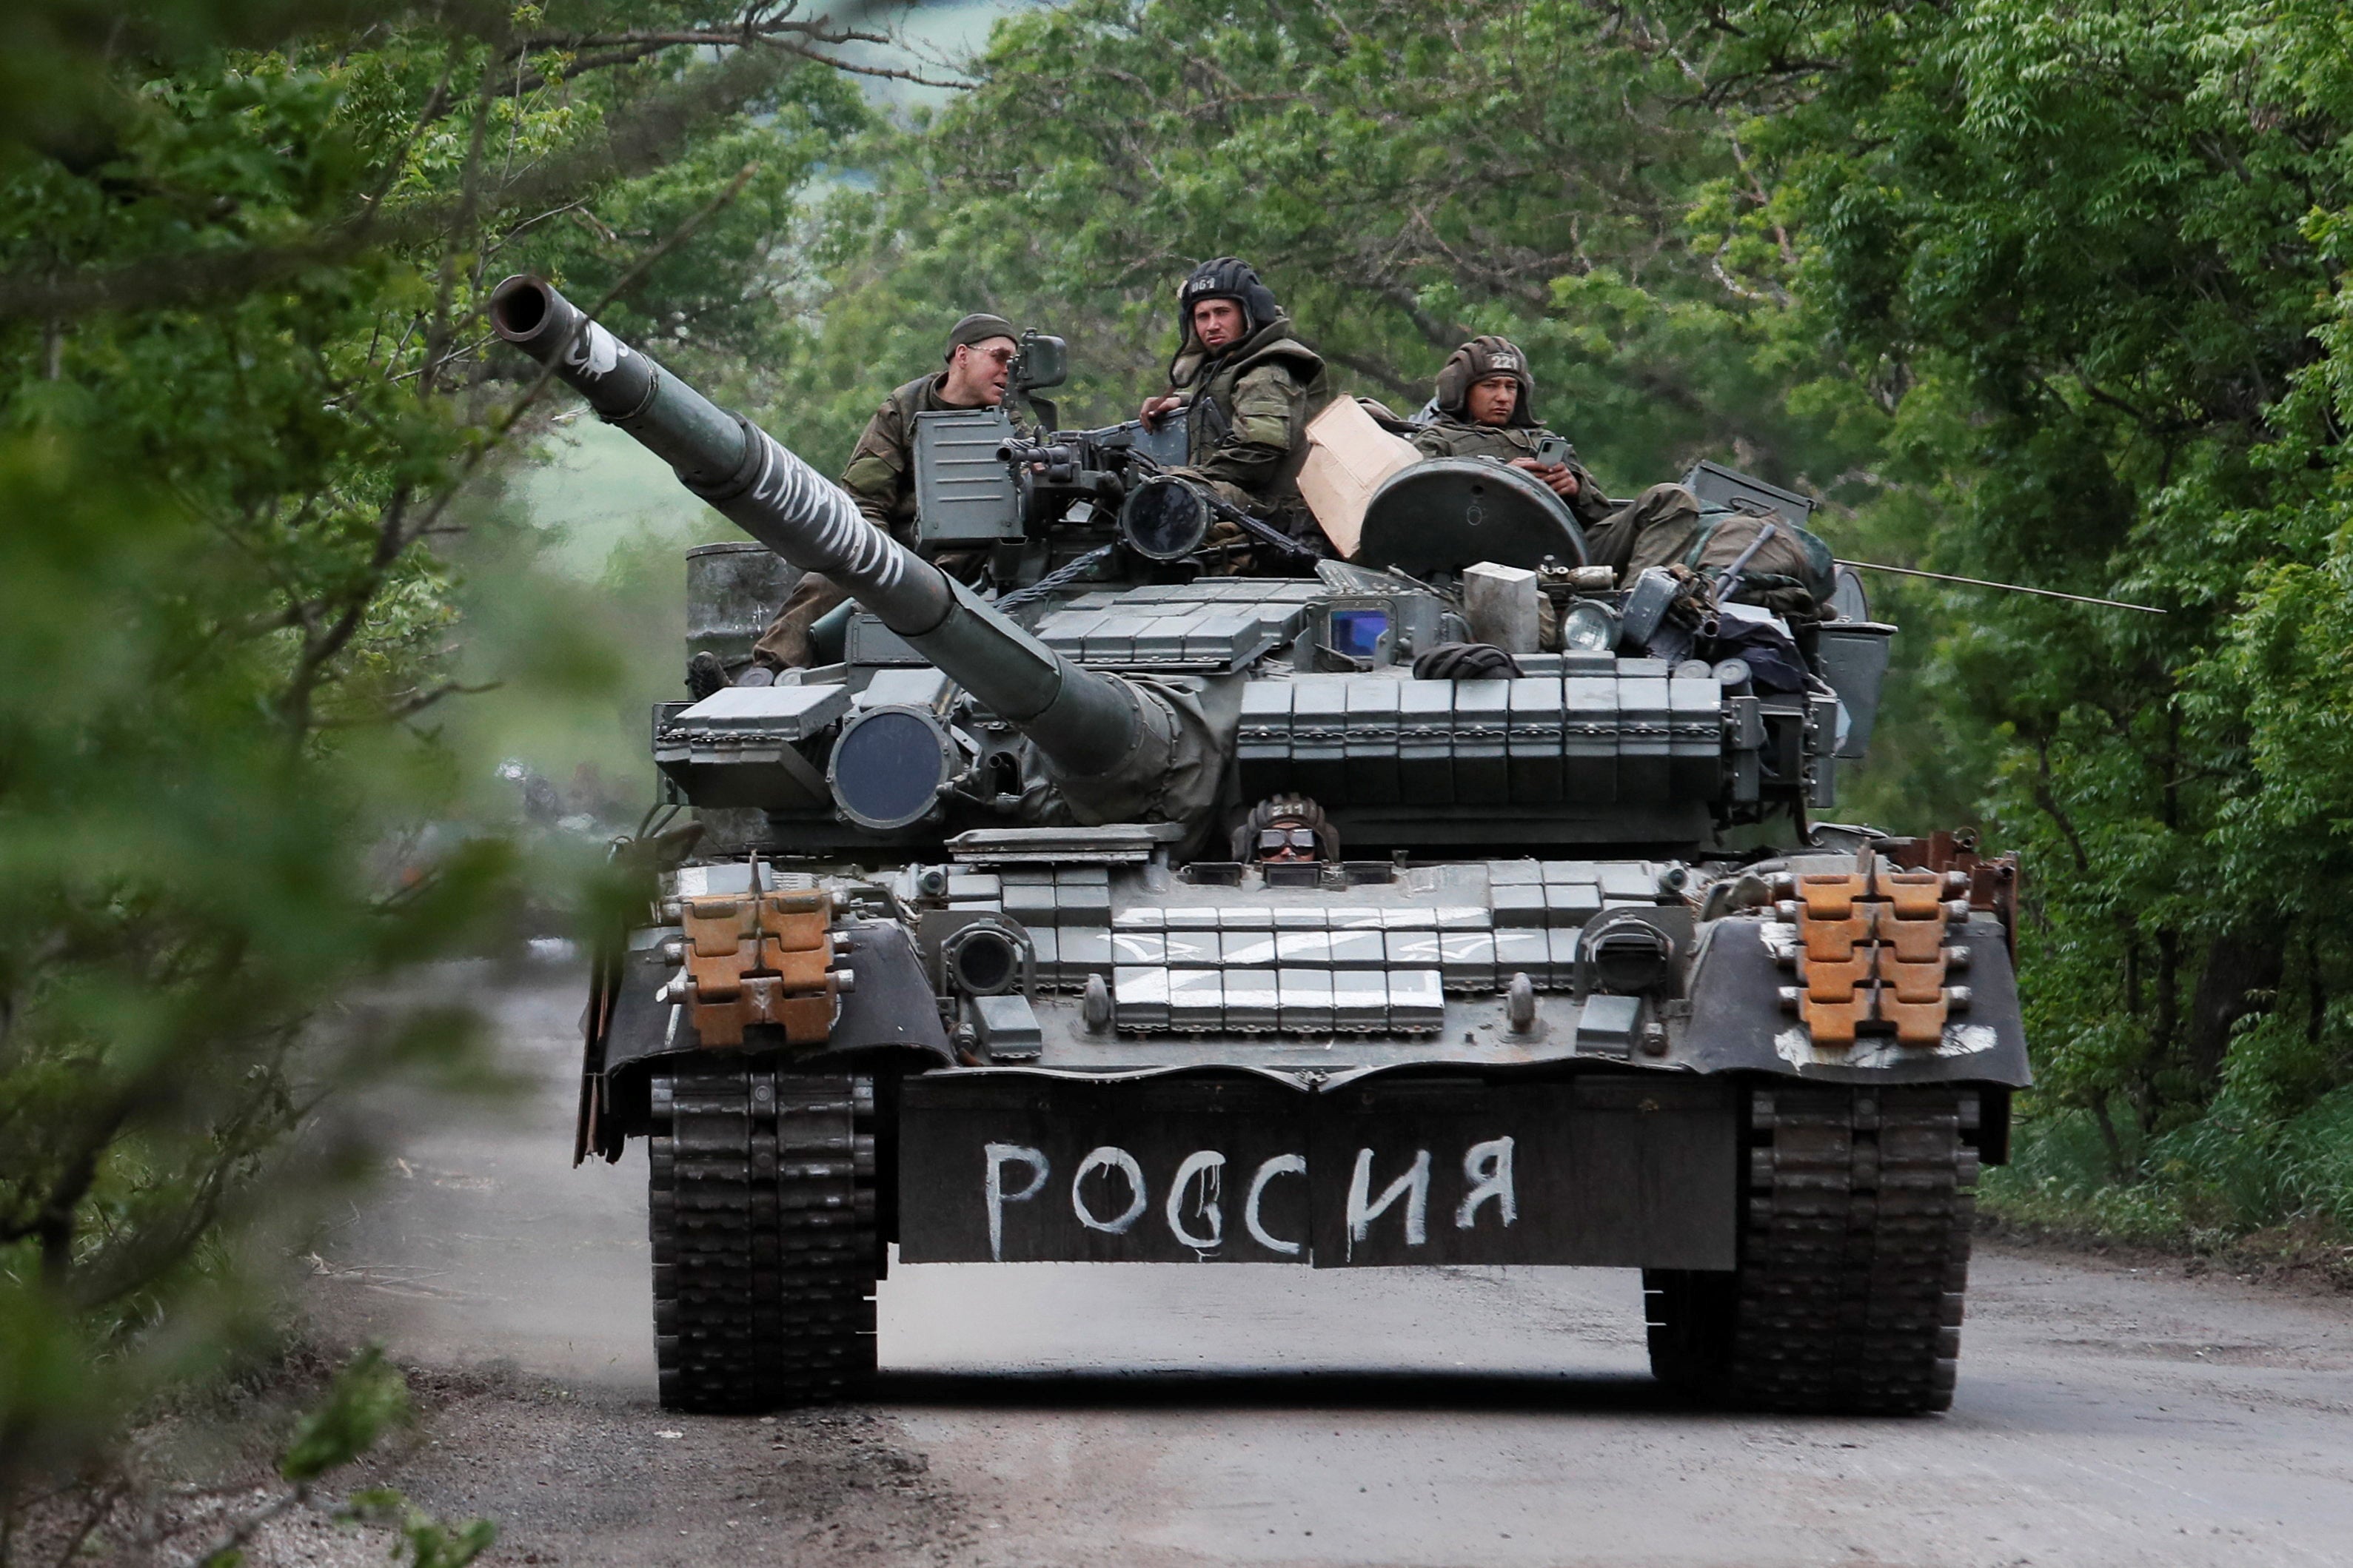 Service members of pro-Russian troops drive a tank during Ukraine-Russia conflict in the Donetsk region, Ukraine May 22, 2022. The writing on the tank reads: “Russia”